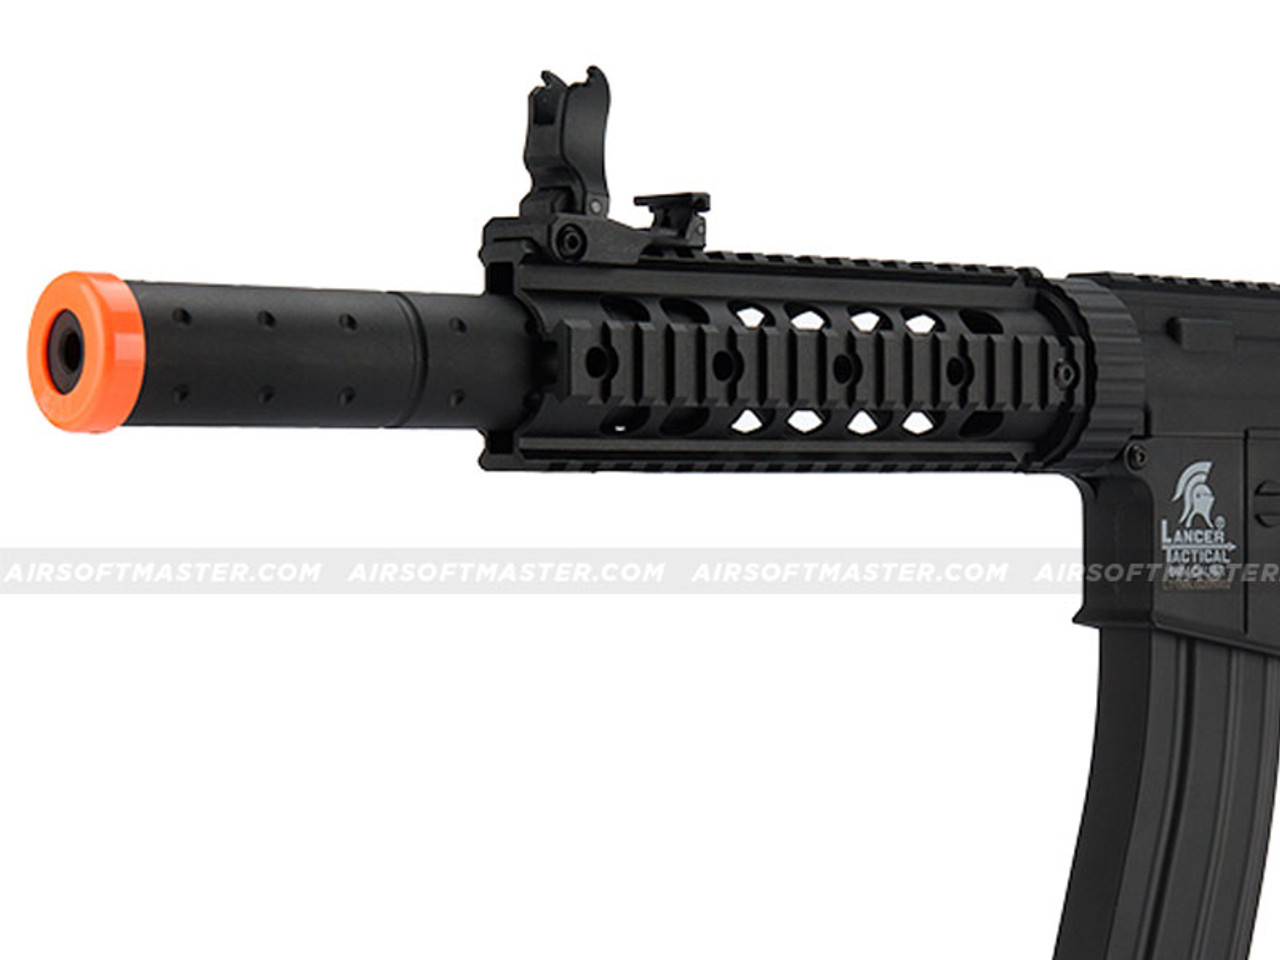 Full Metal Body & Gearbox M4S Airsoft Electric Gun System BB up to 400 FPS